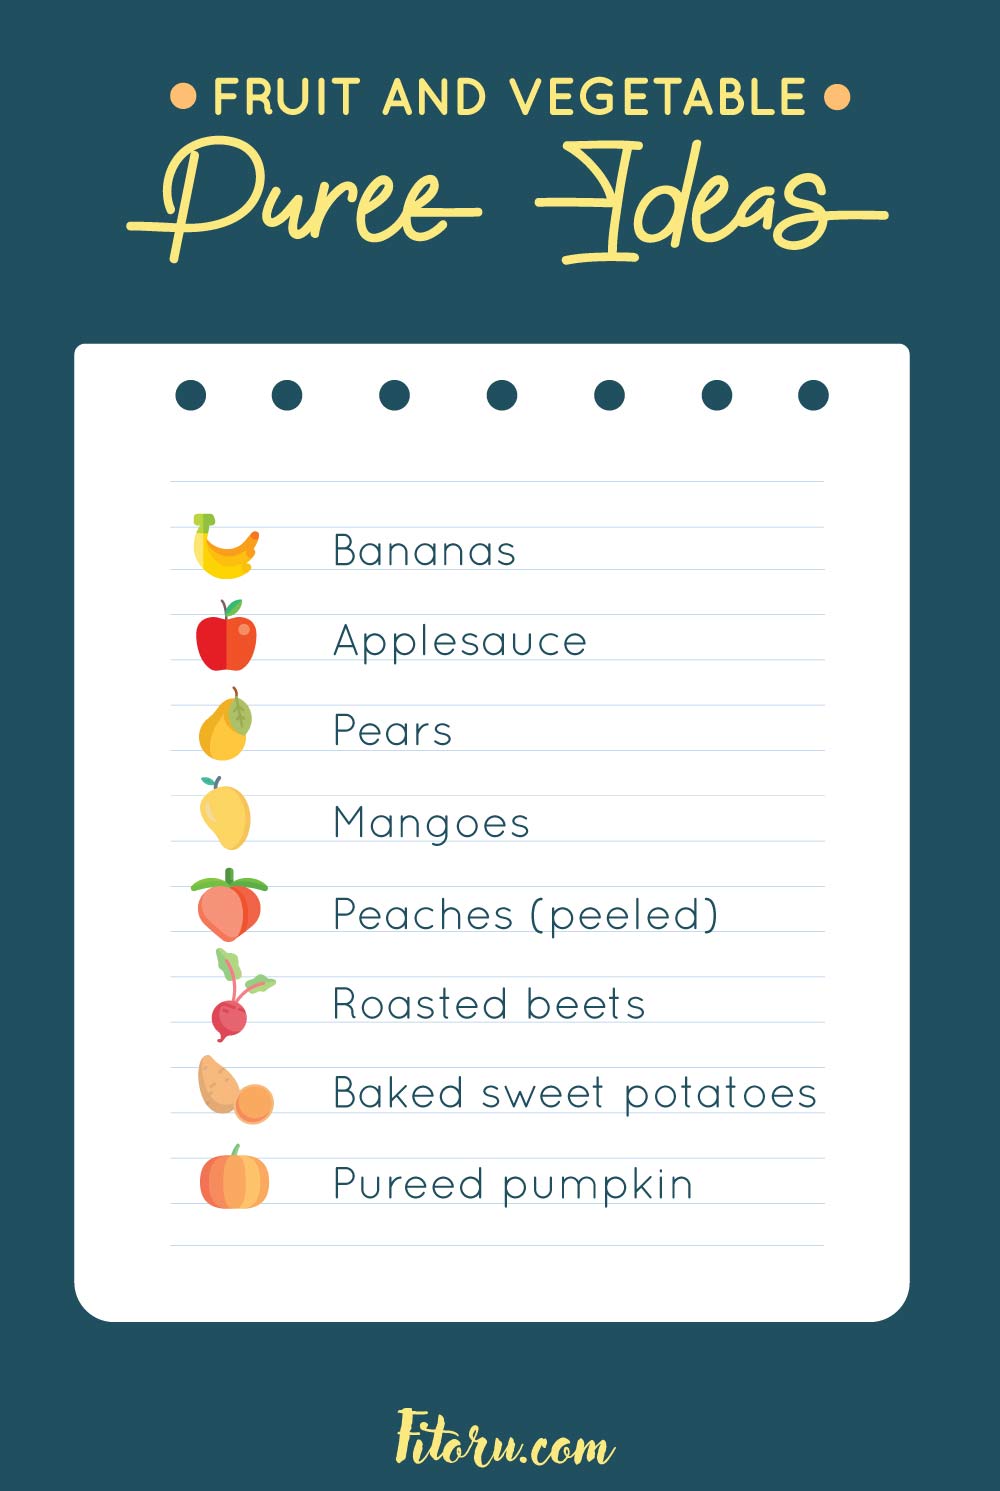 Here are some ideas for fruit purees.